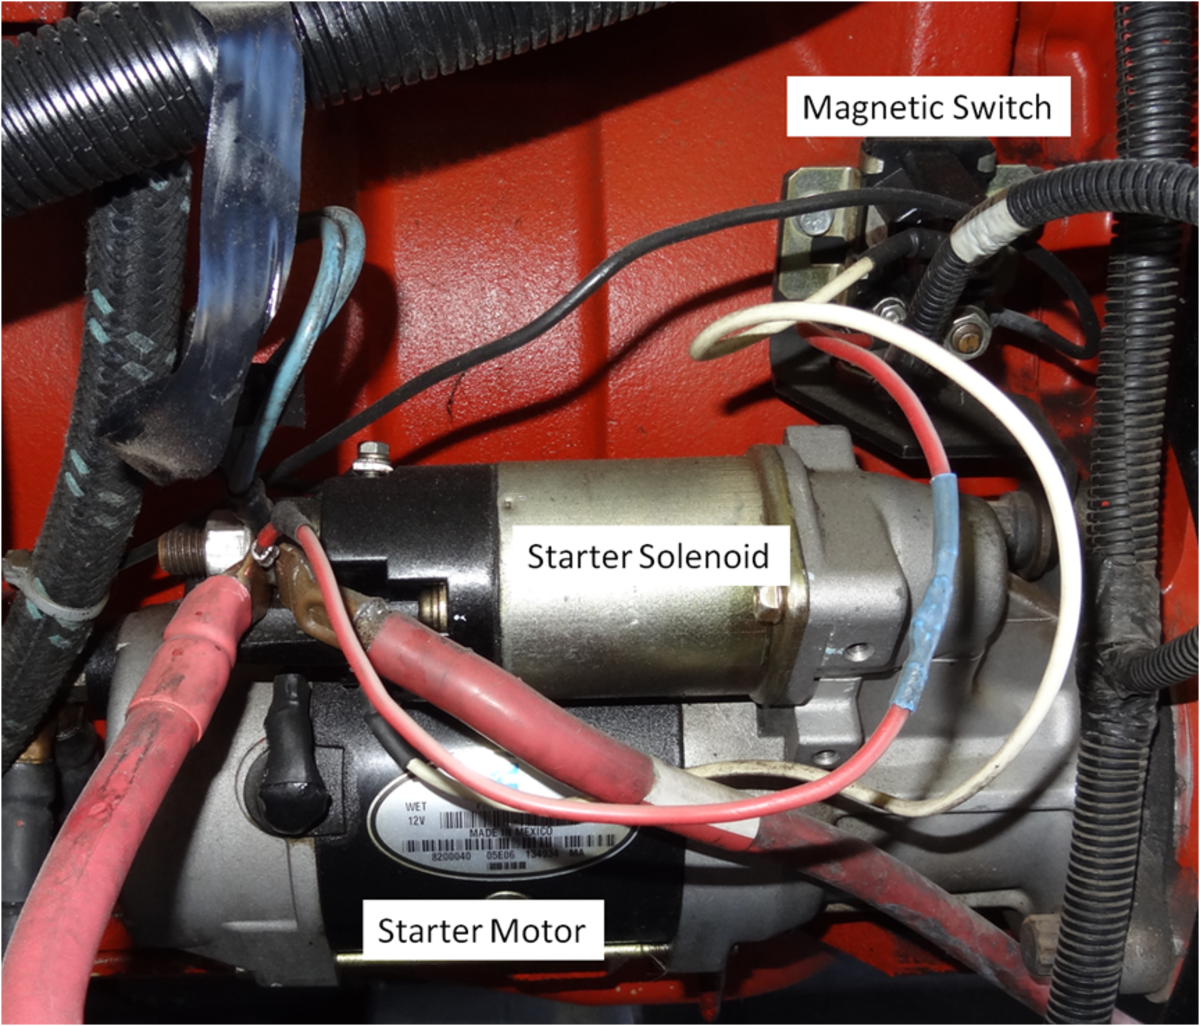 Picture of a starter motor, a starter solenoid, and a magnetic switch all together